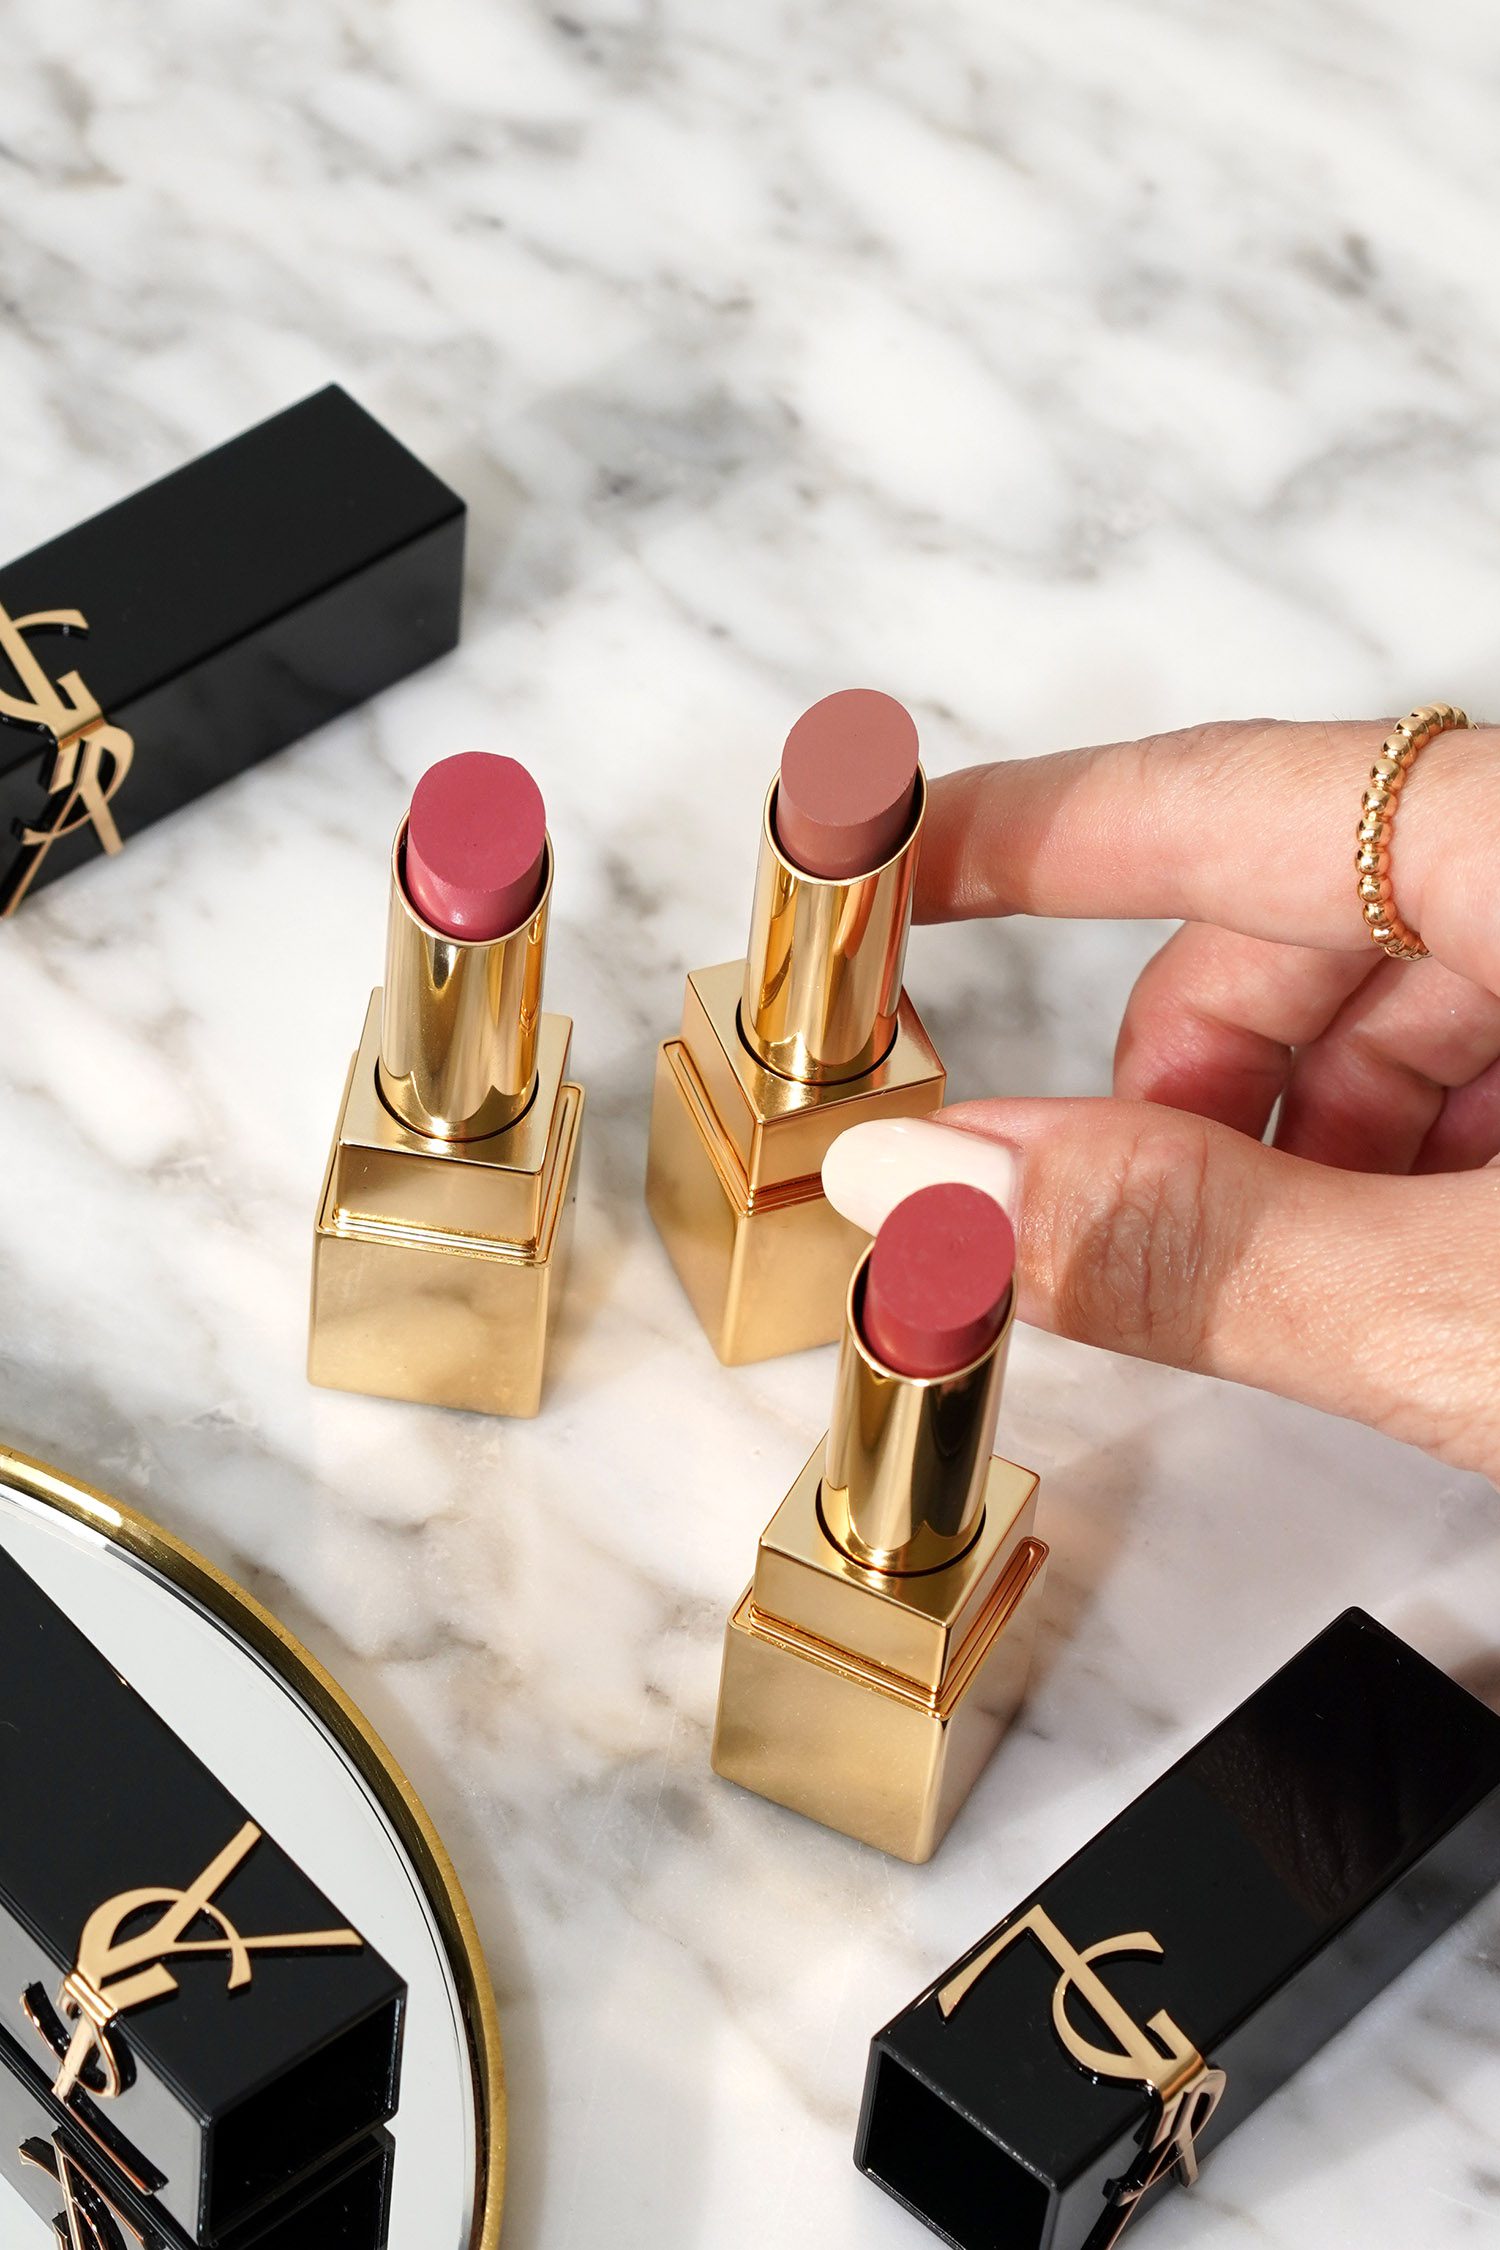 9 Best Chanel Lipsticks That Look Pretty Bold And Tempting